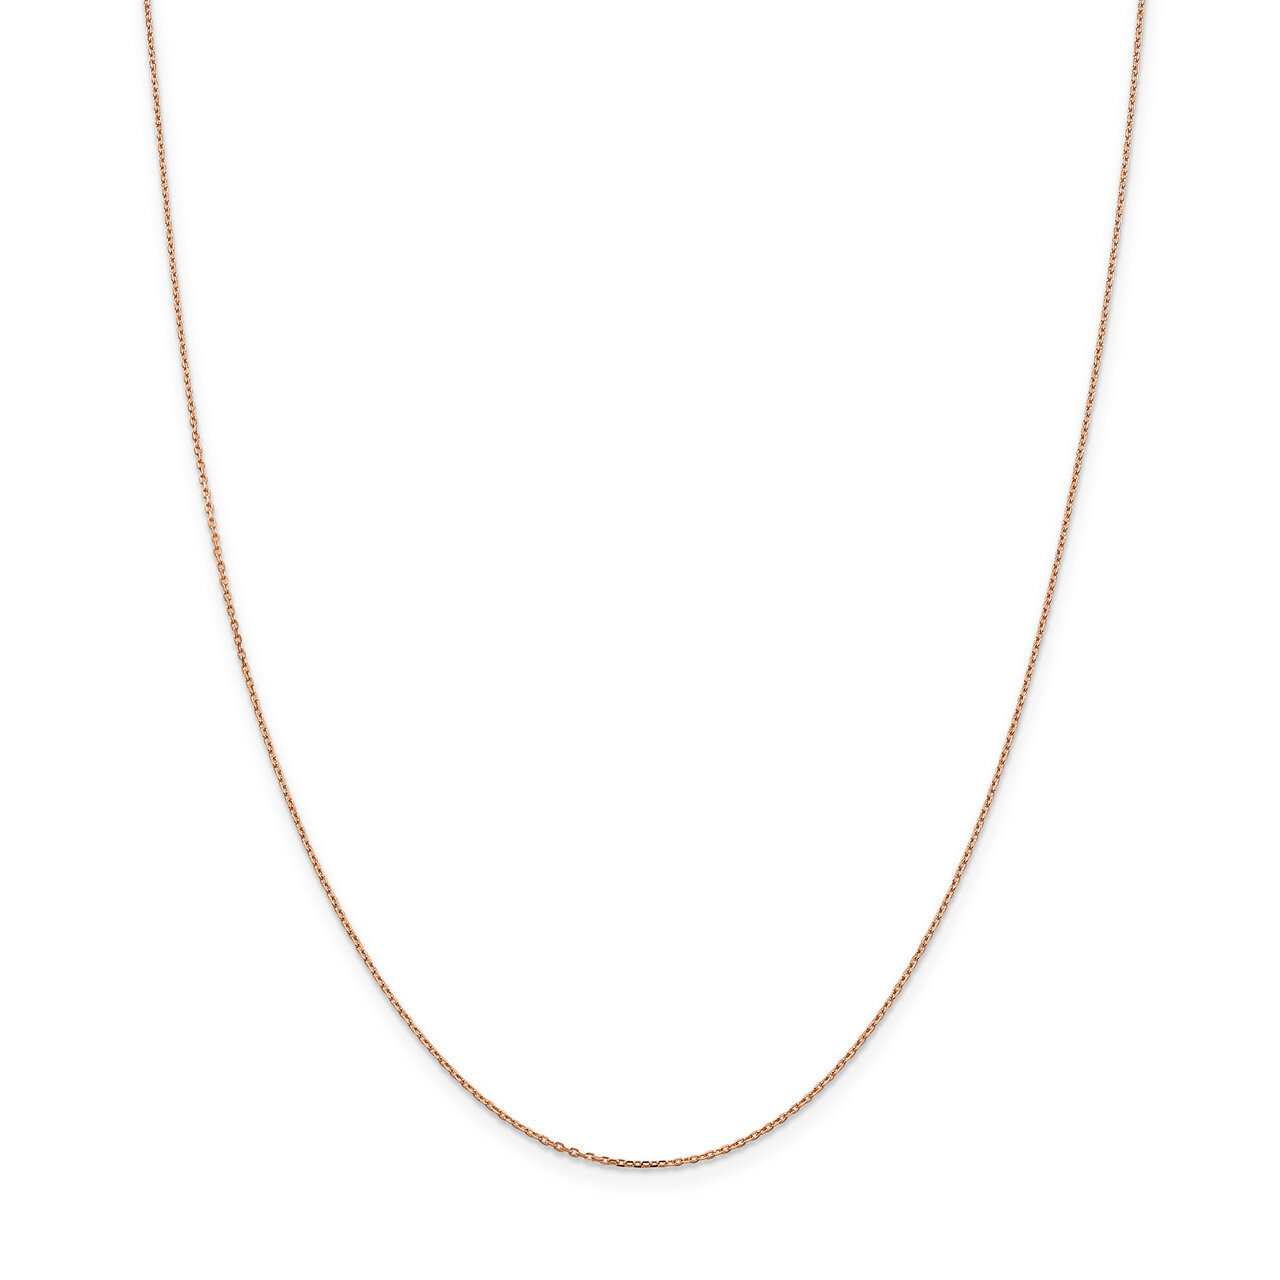 10 Inch 1.0mm Cable Chain 14k Rose Gold RSC20-10